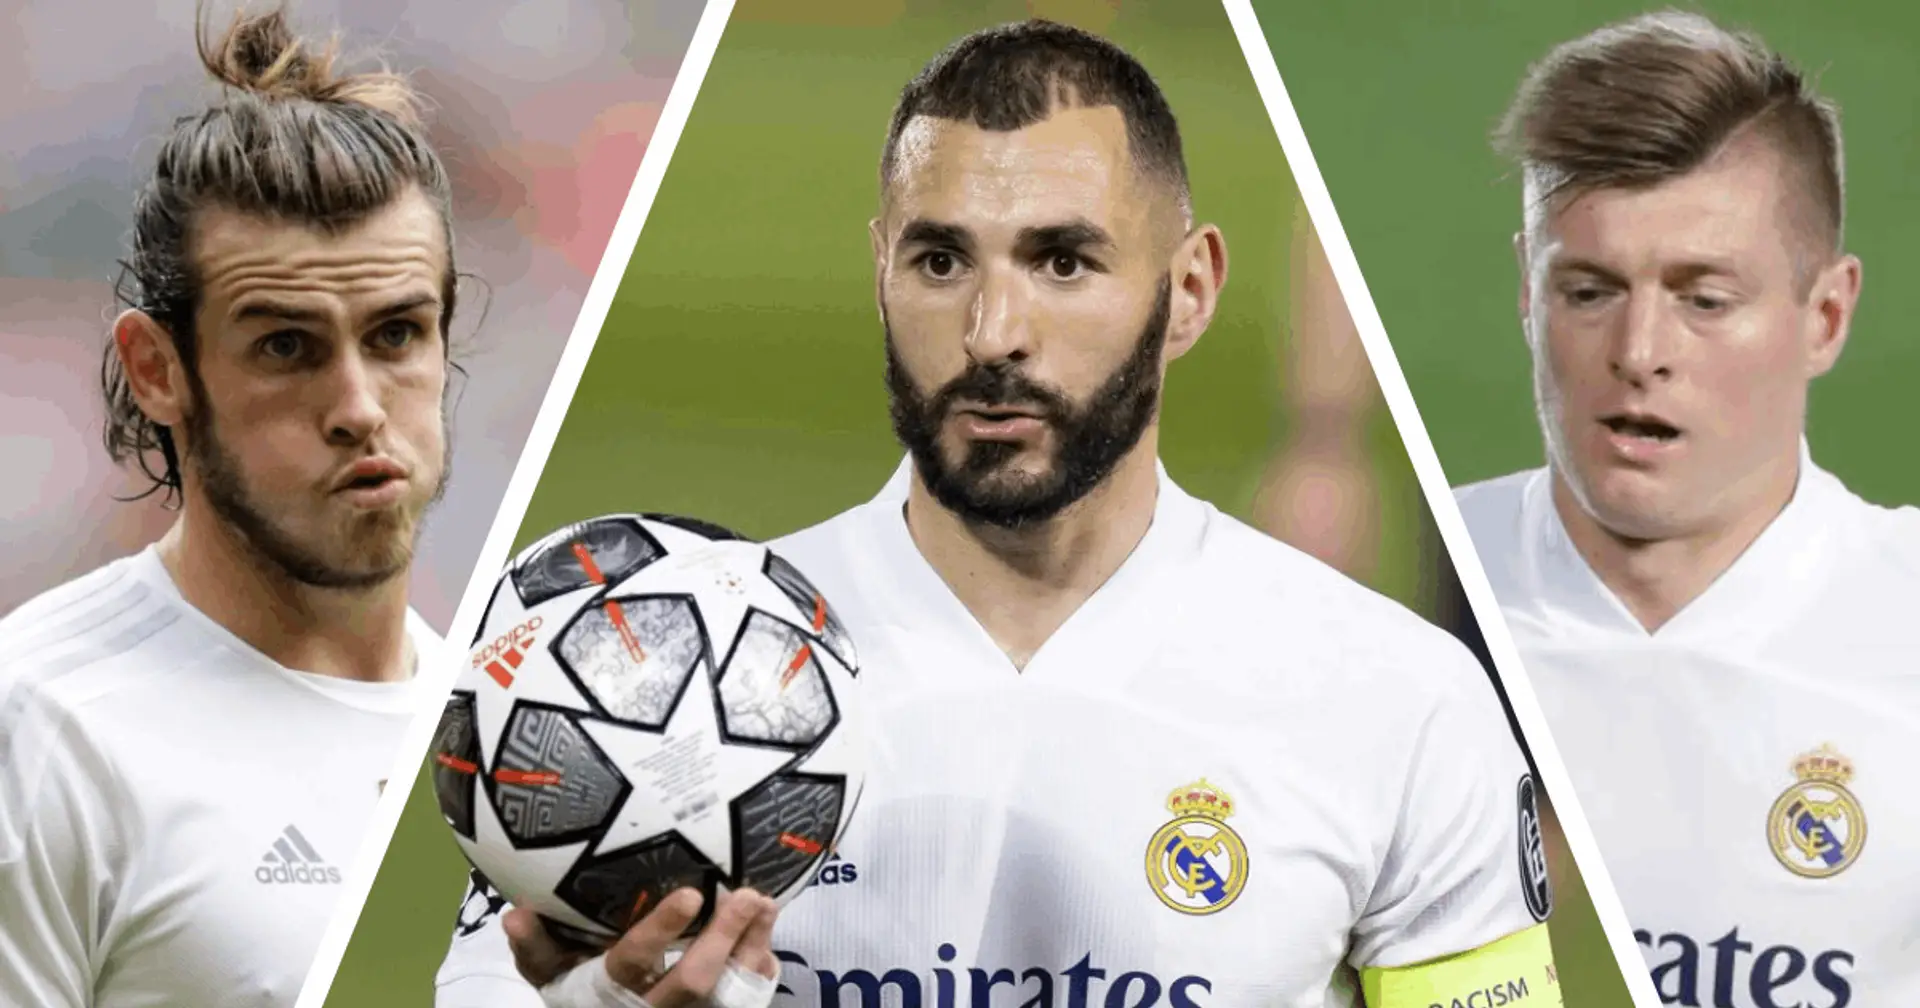 Toni Kroos, Karim Benzema and 21 more players with 2 years or less left on their contracts